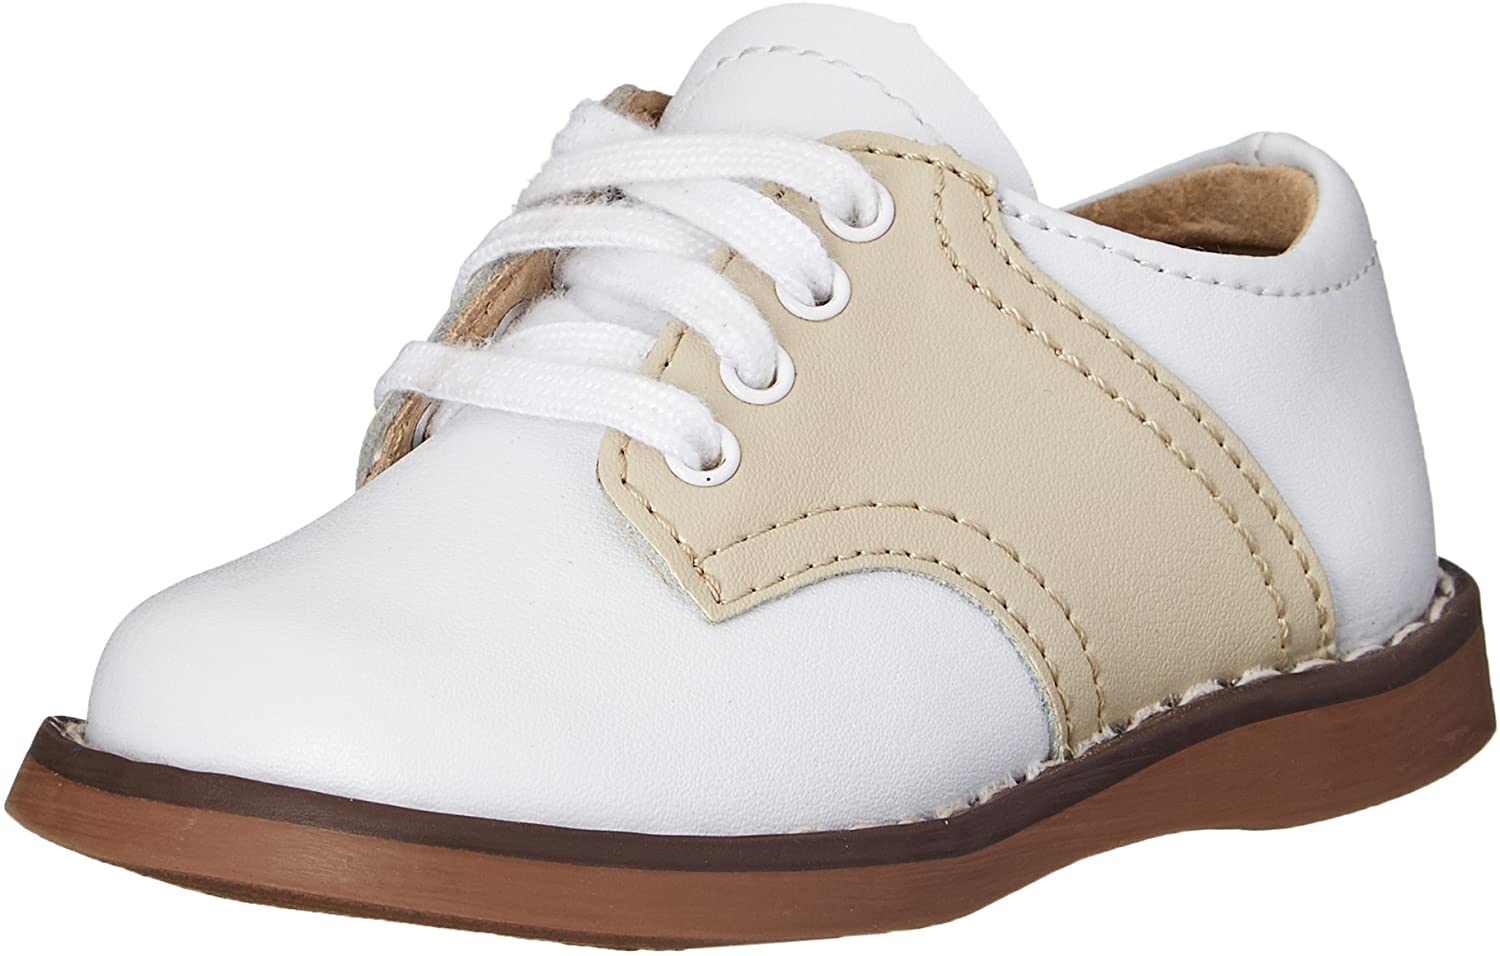 Footmates Cheer Toddler Shoe (age 2-4 years) in White/Ecru view from the front